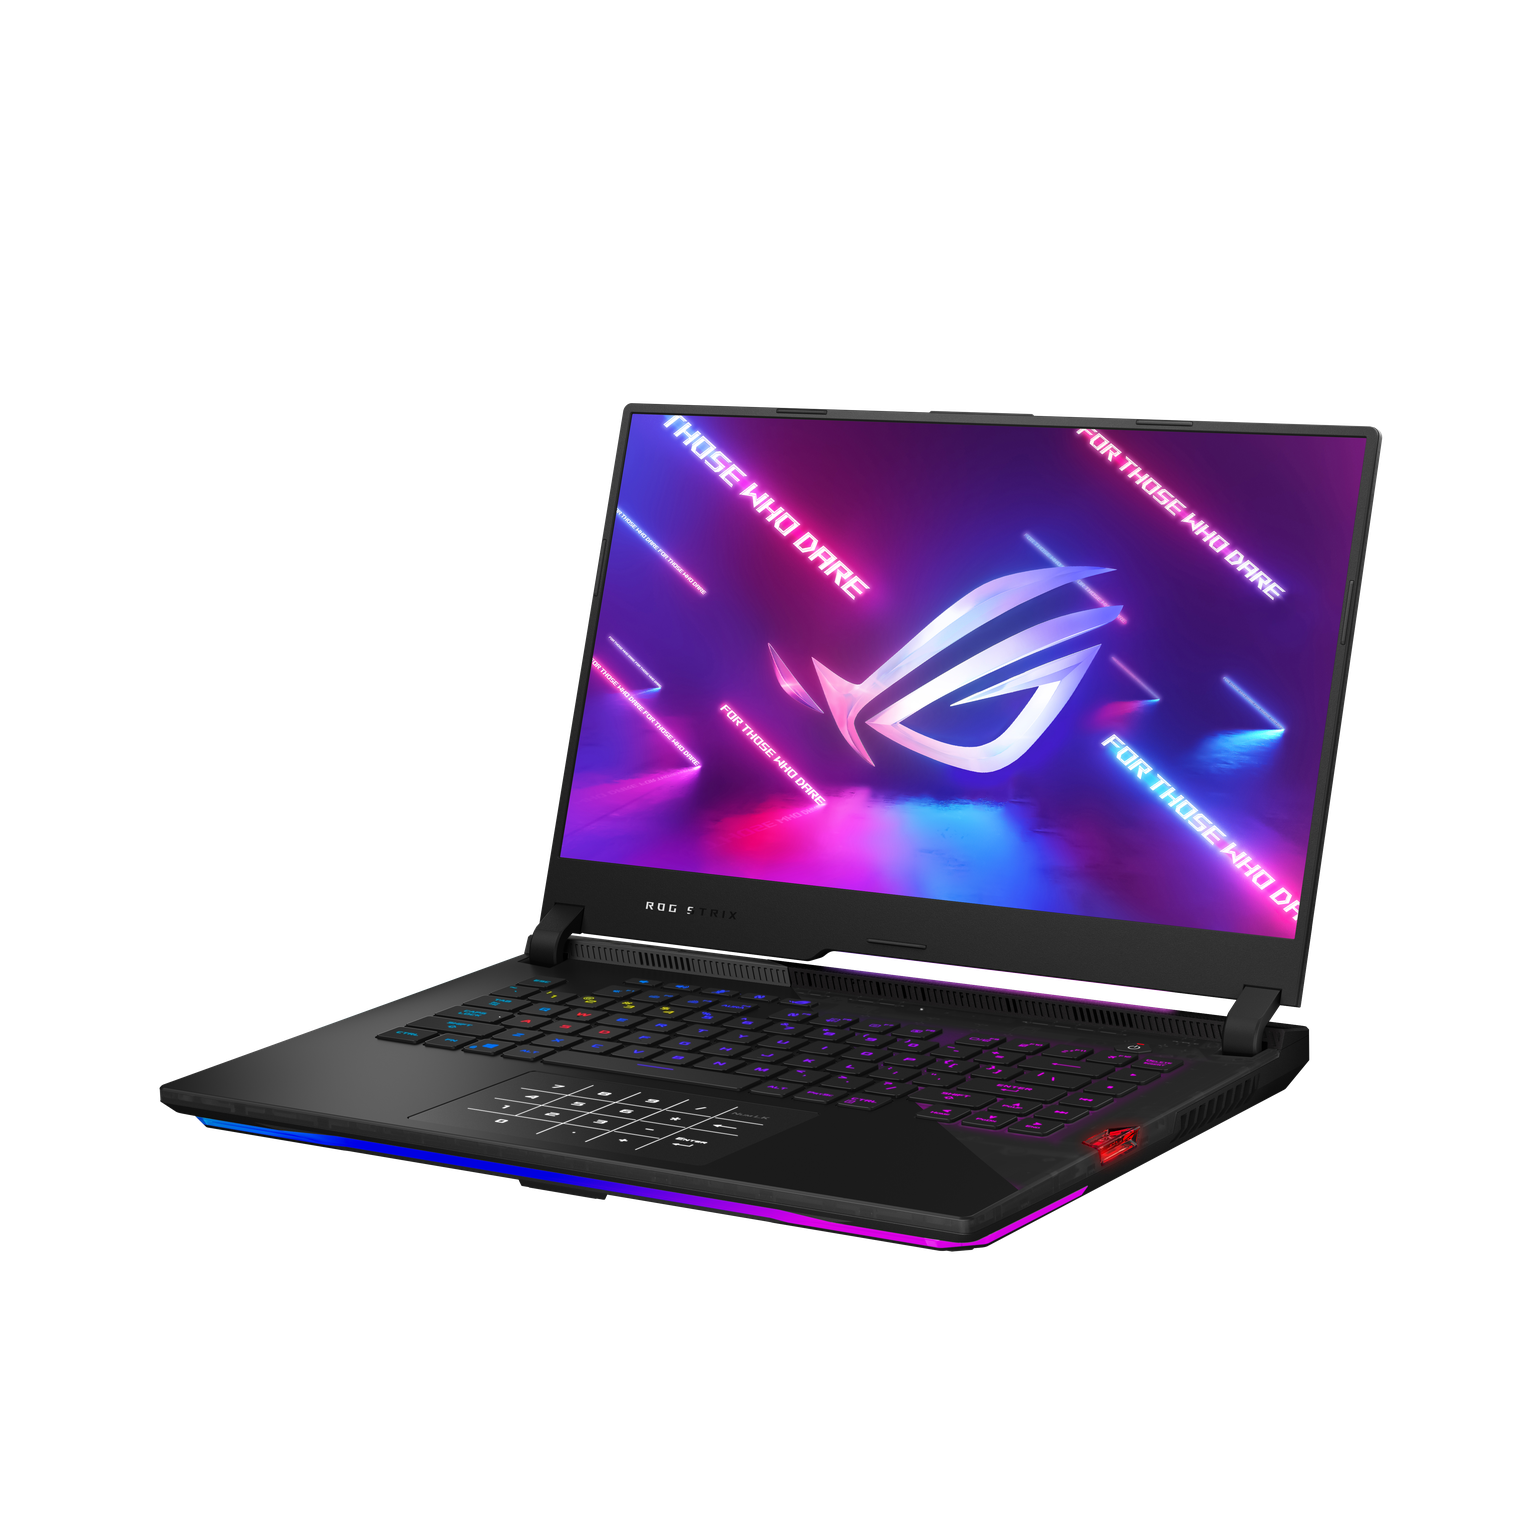 Asus ROG Strix Scar 15 with Ryzen 9 5900HX and GeForce RTX 3080 hits lowest designate in 30 days on Amazon ensuing from a 25% reduce price